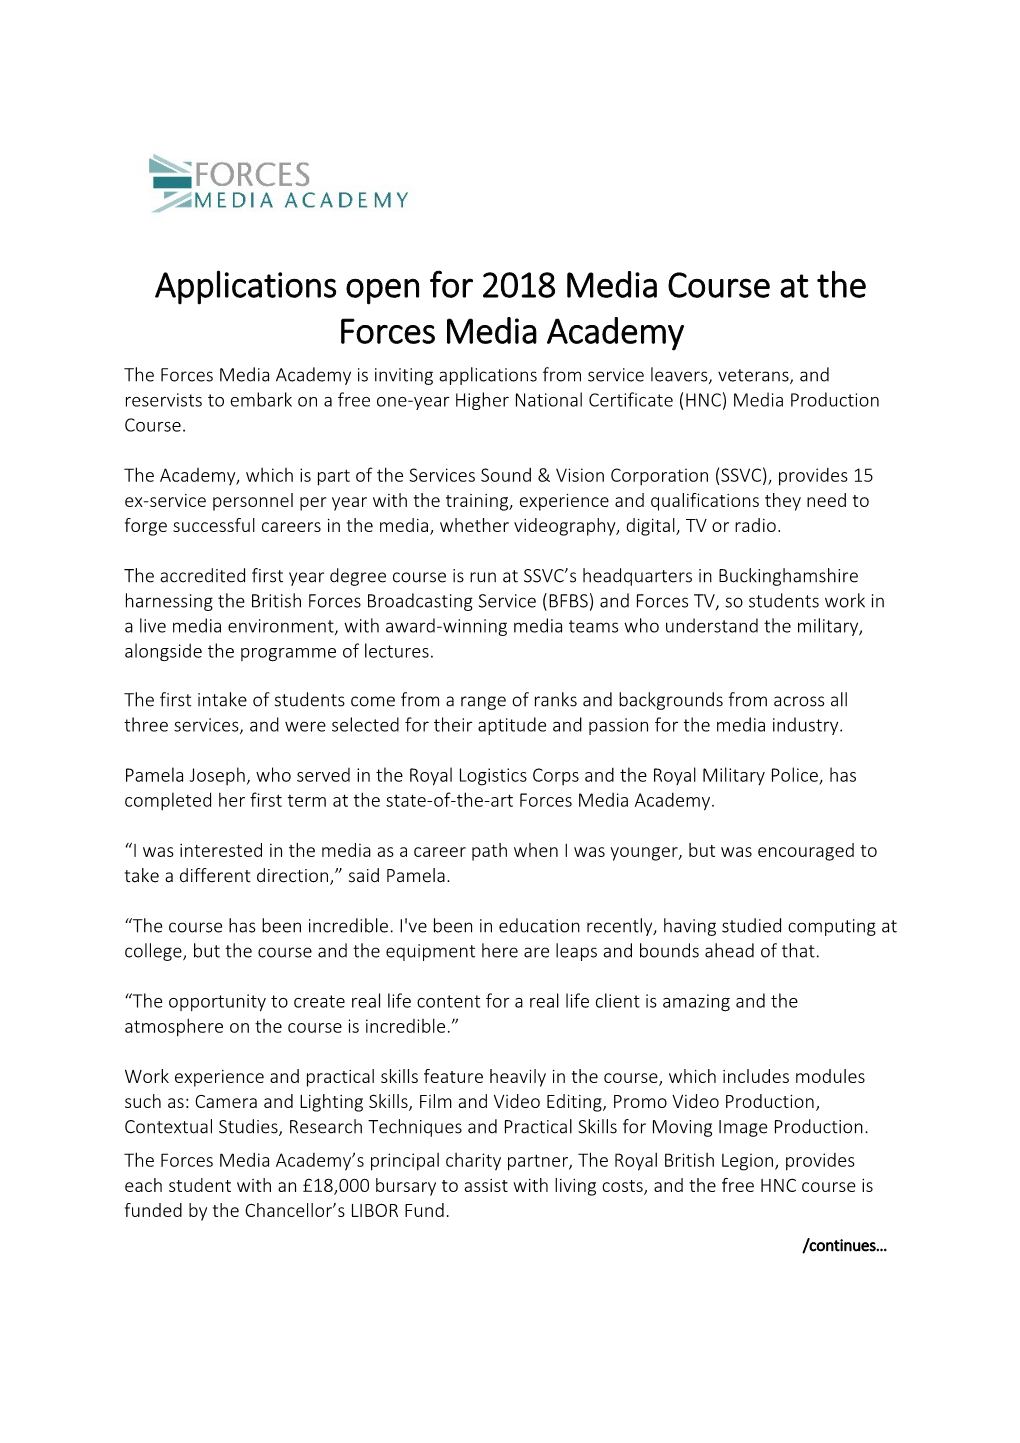 Applications Open for 2018 Media Course at the Forces Media Academy